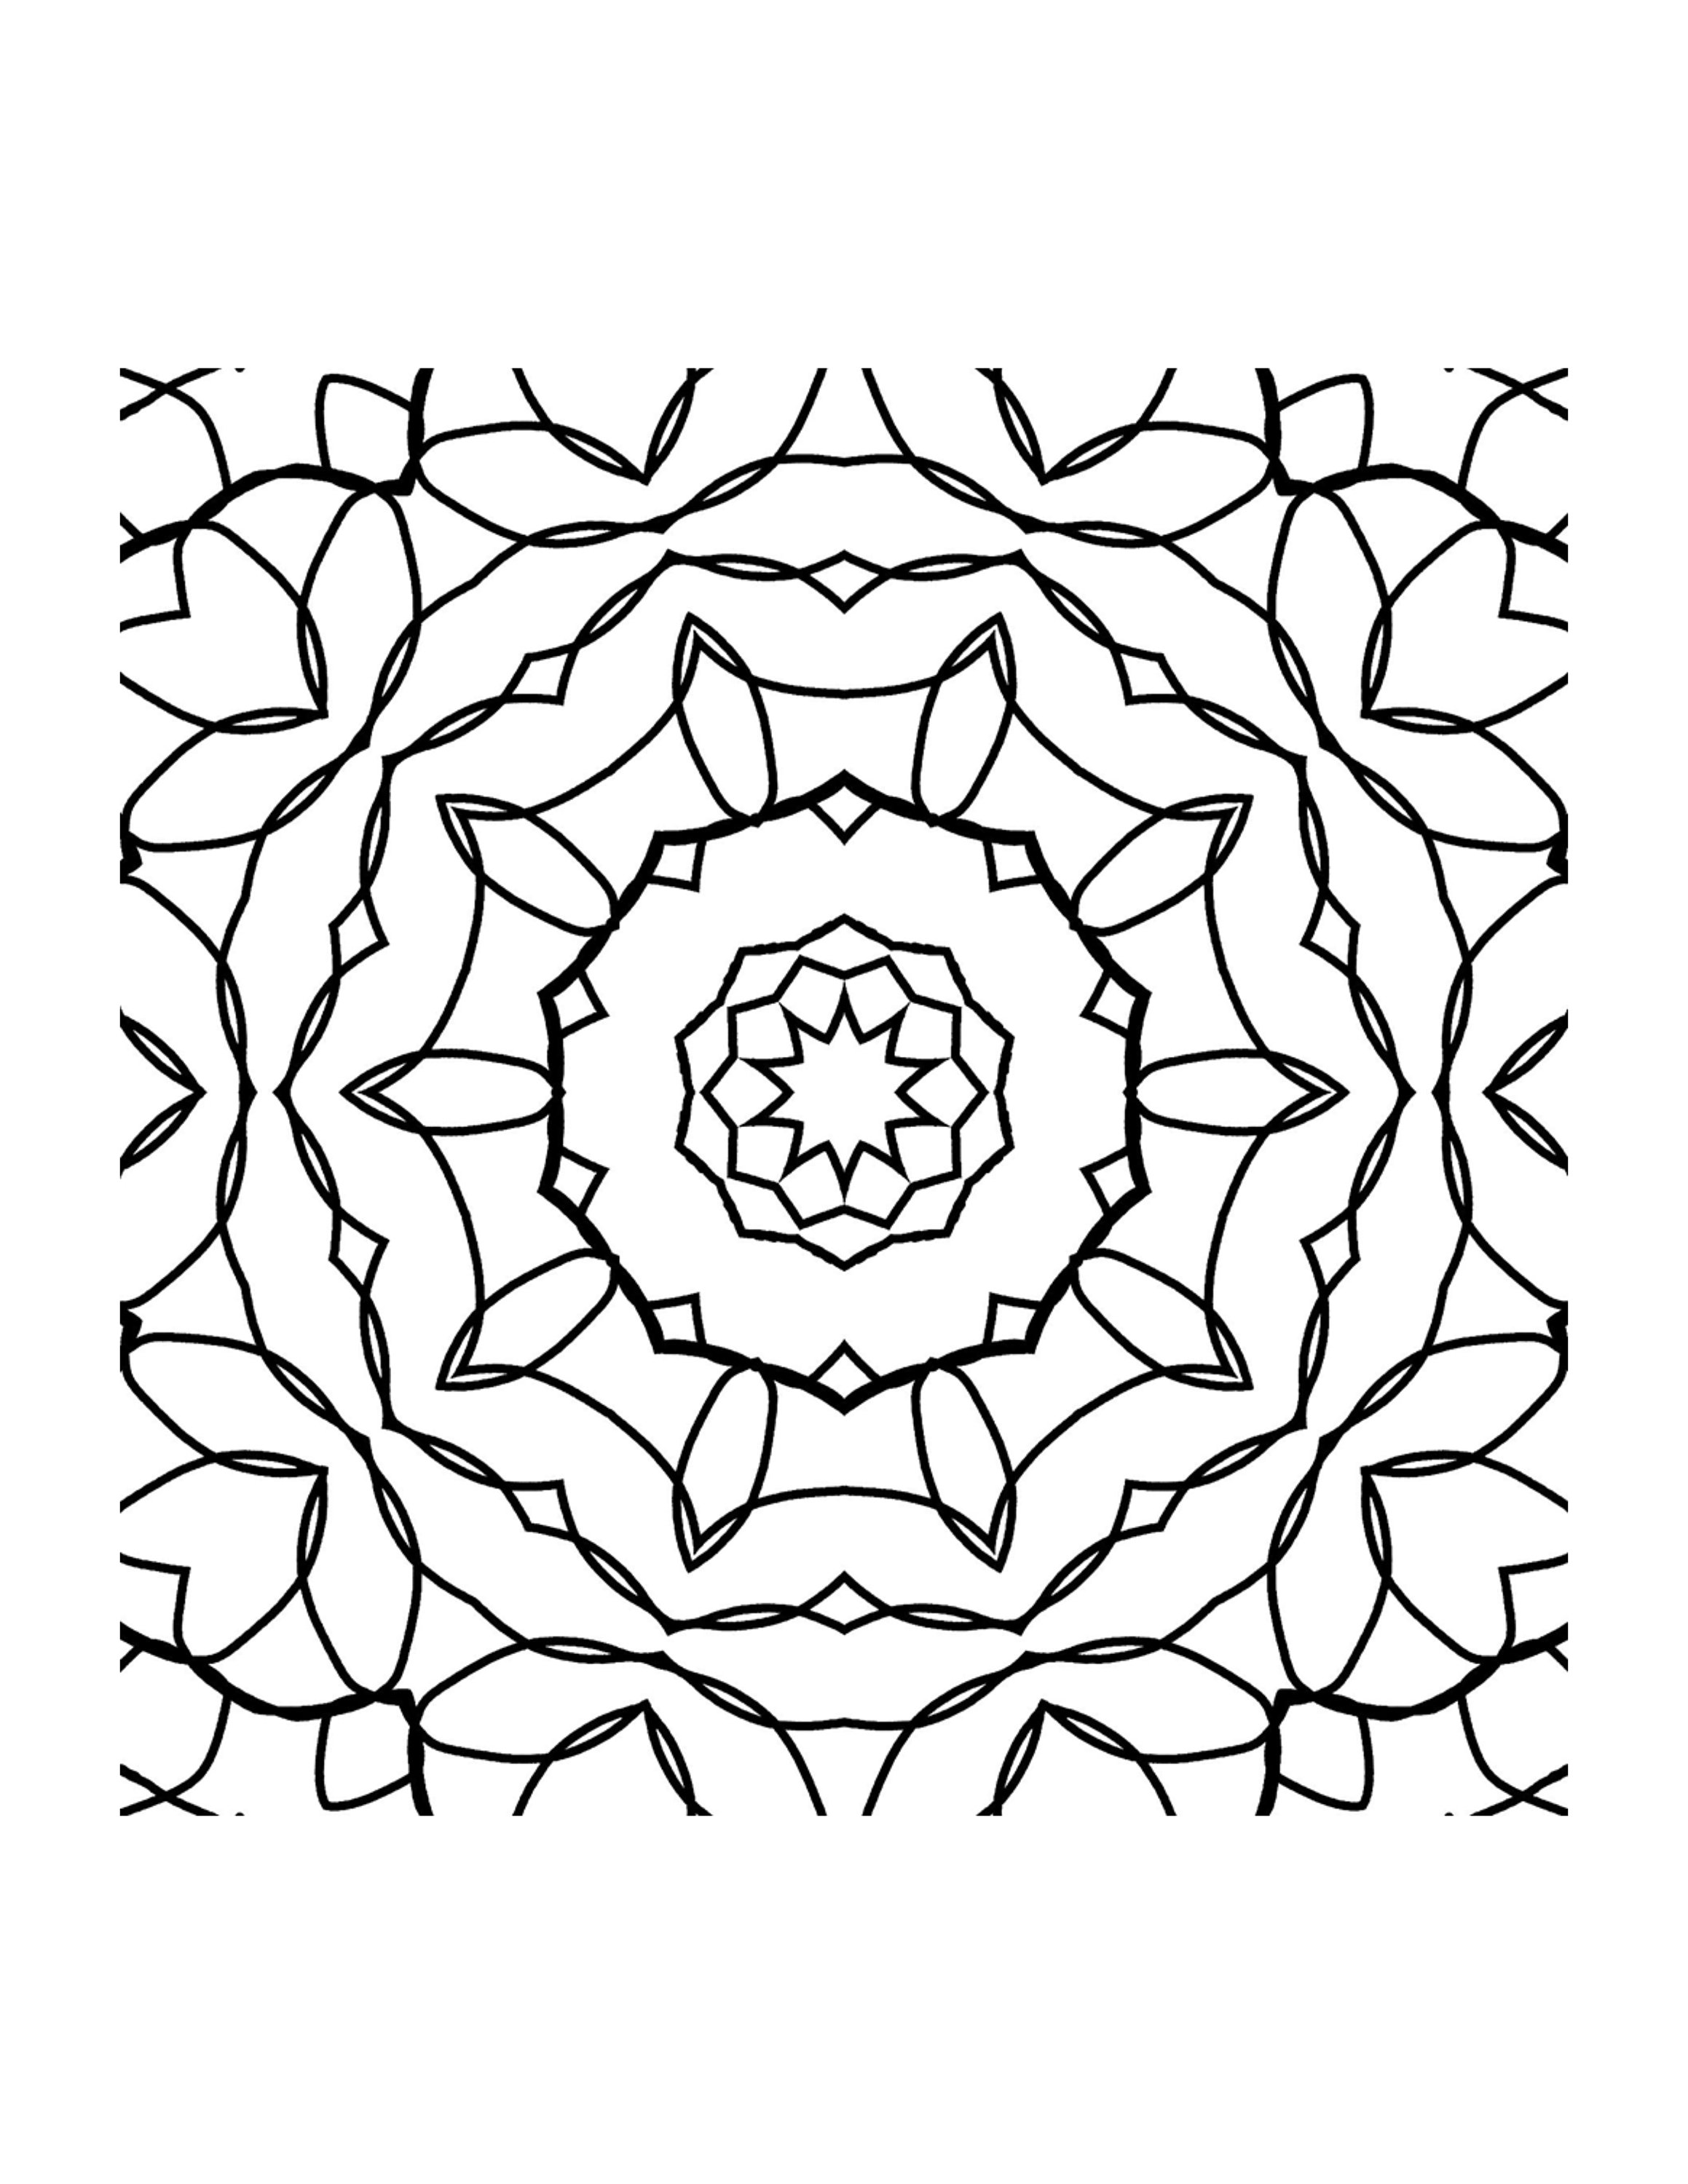 Coloring Page Book Adult Books - 30 Printable Coloring Pages - Mandalas  Adult Coloring Pages, Patterns and More